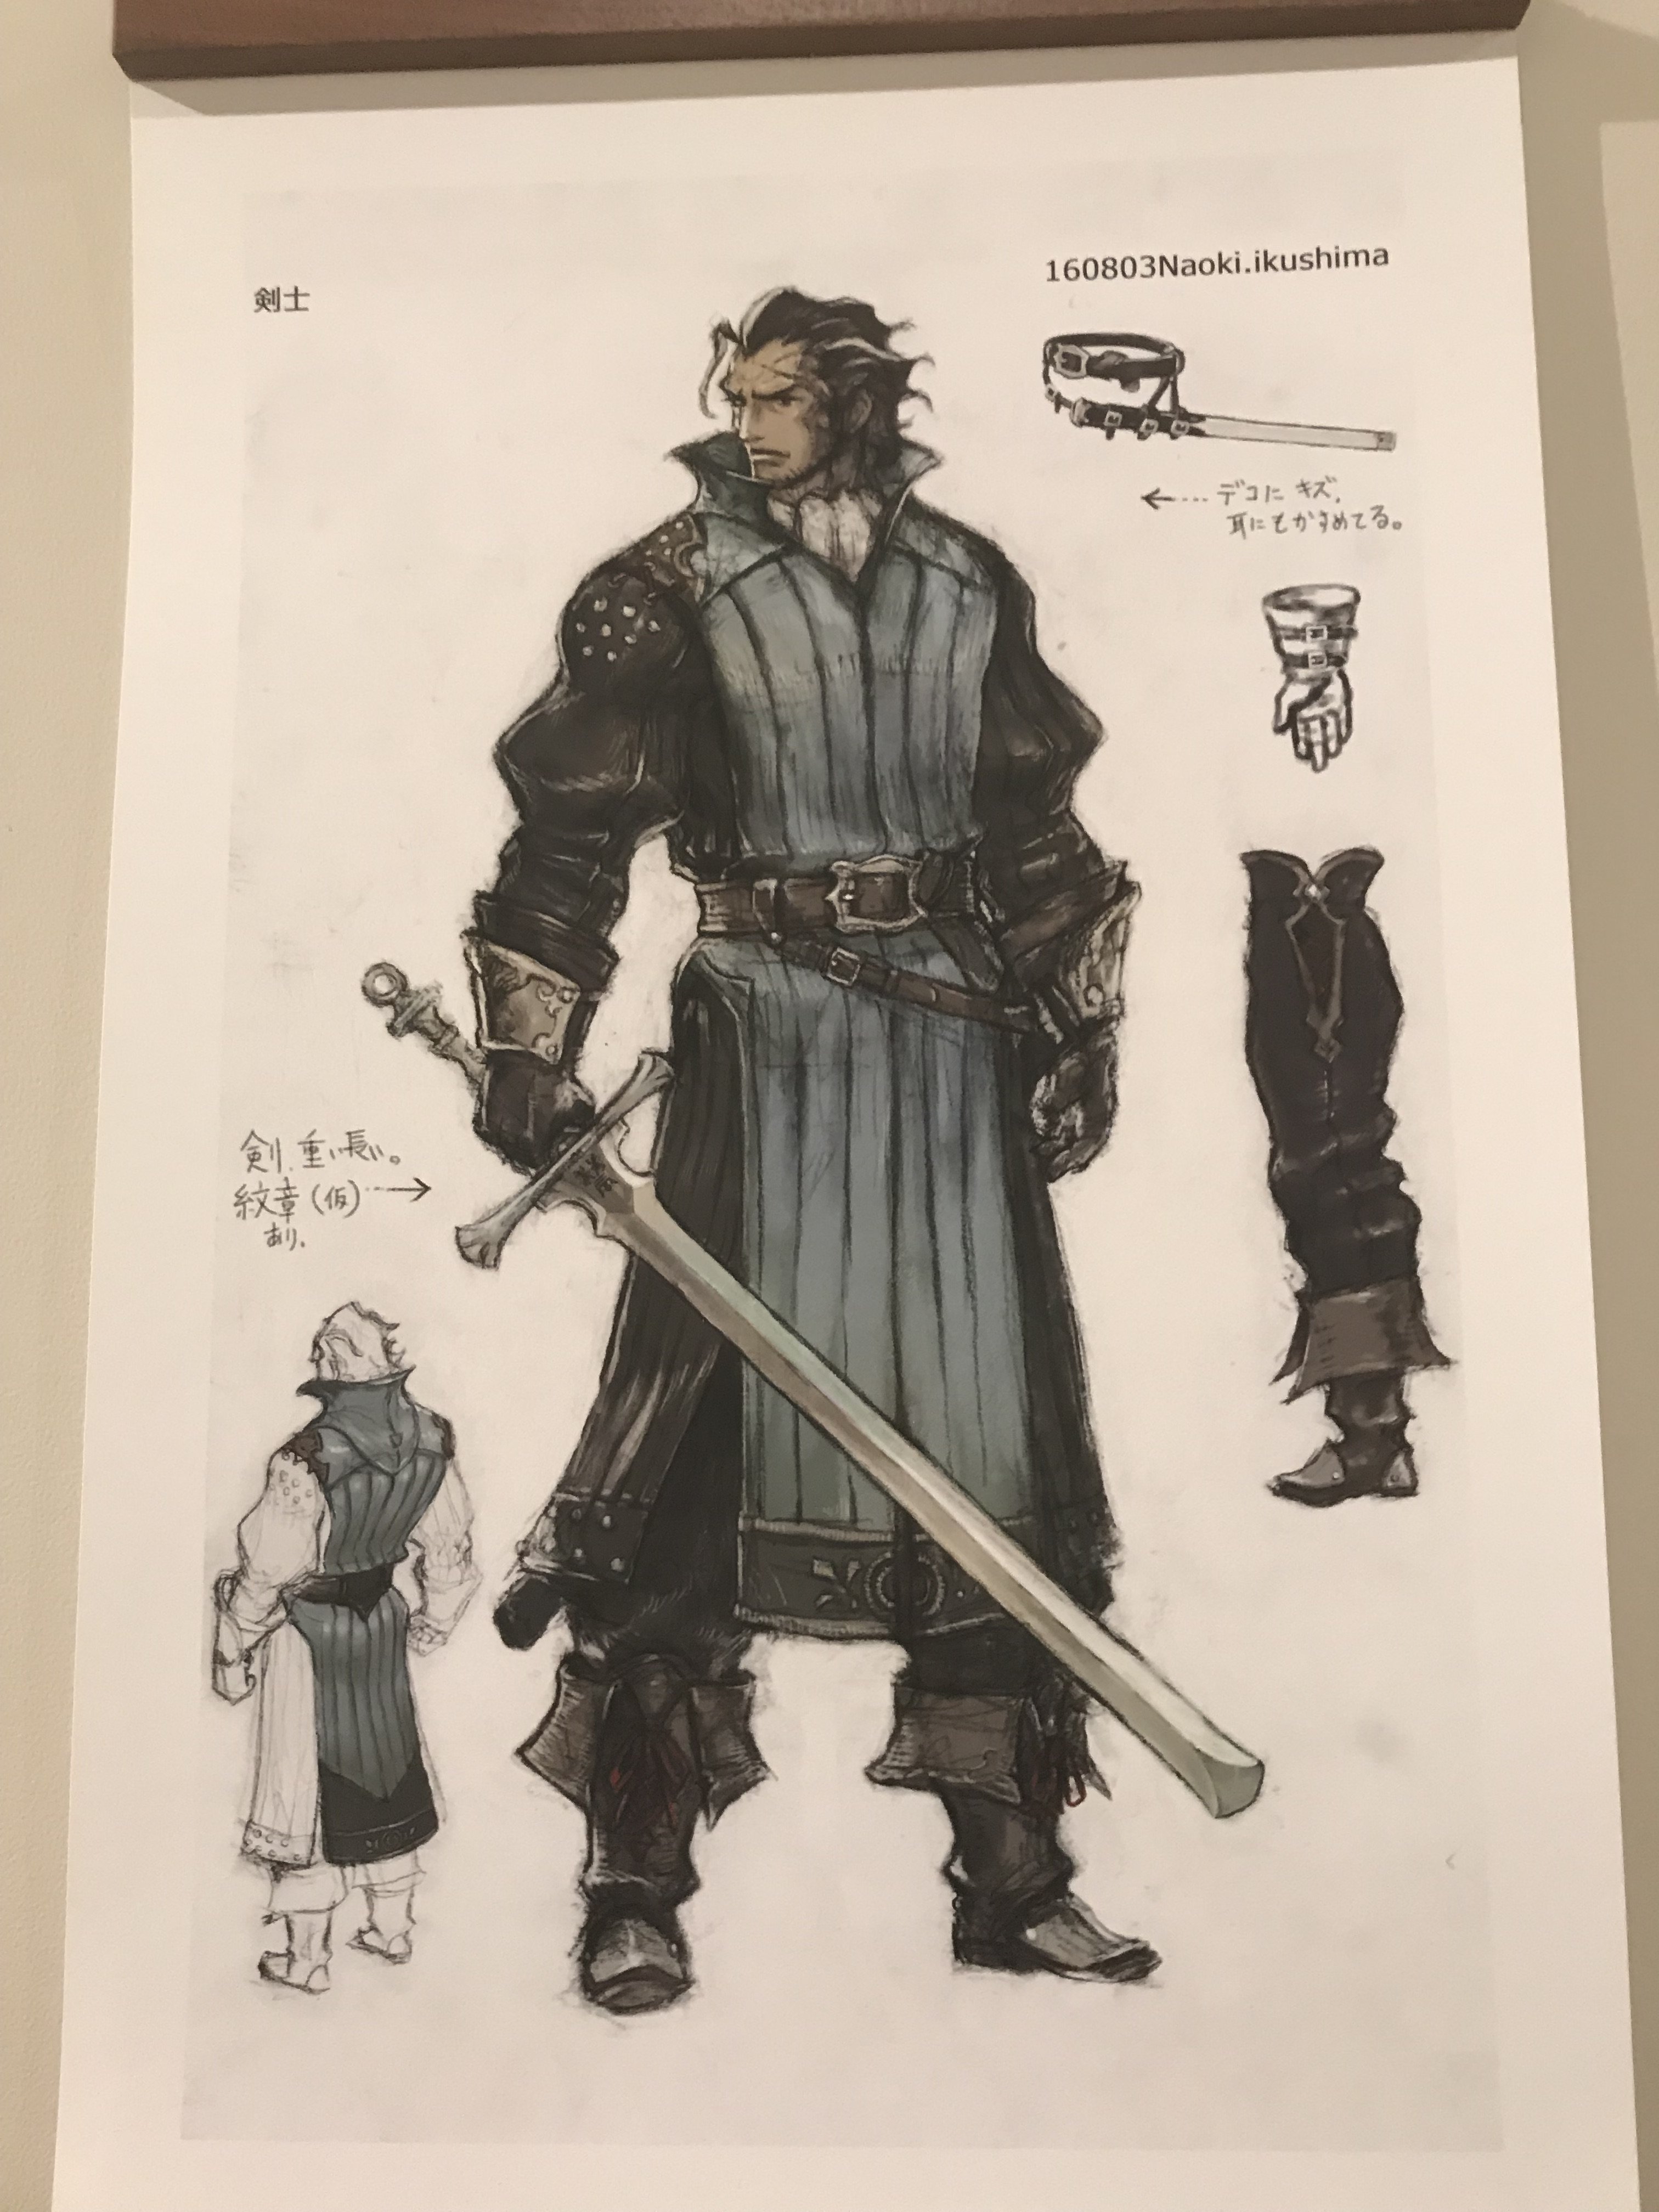 Concept Art Takes Center Stage At The Octopath Traveler Launch